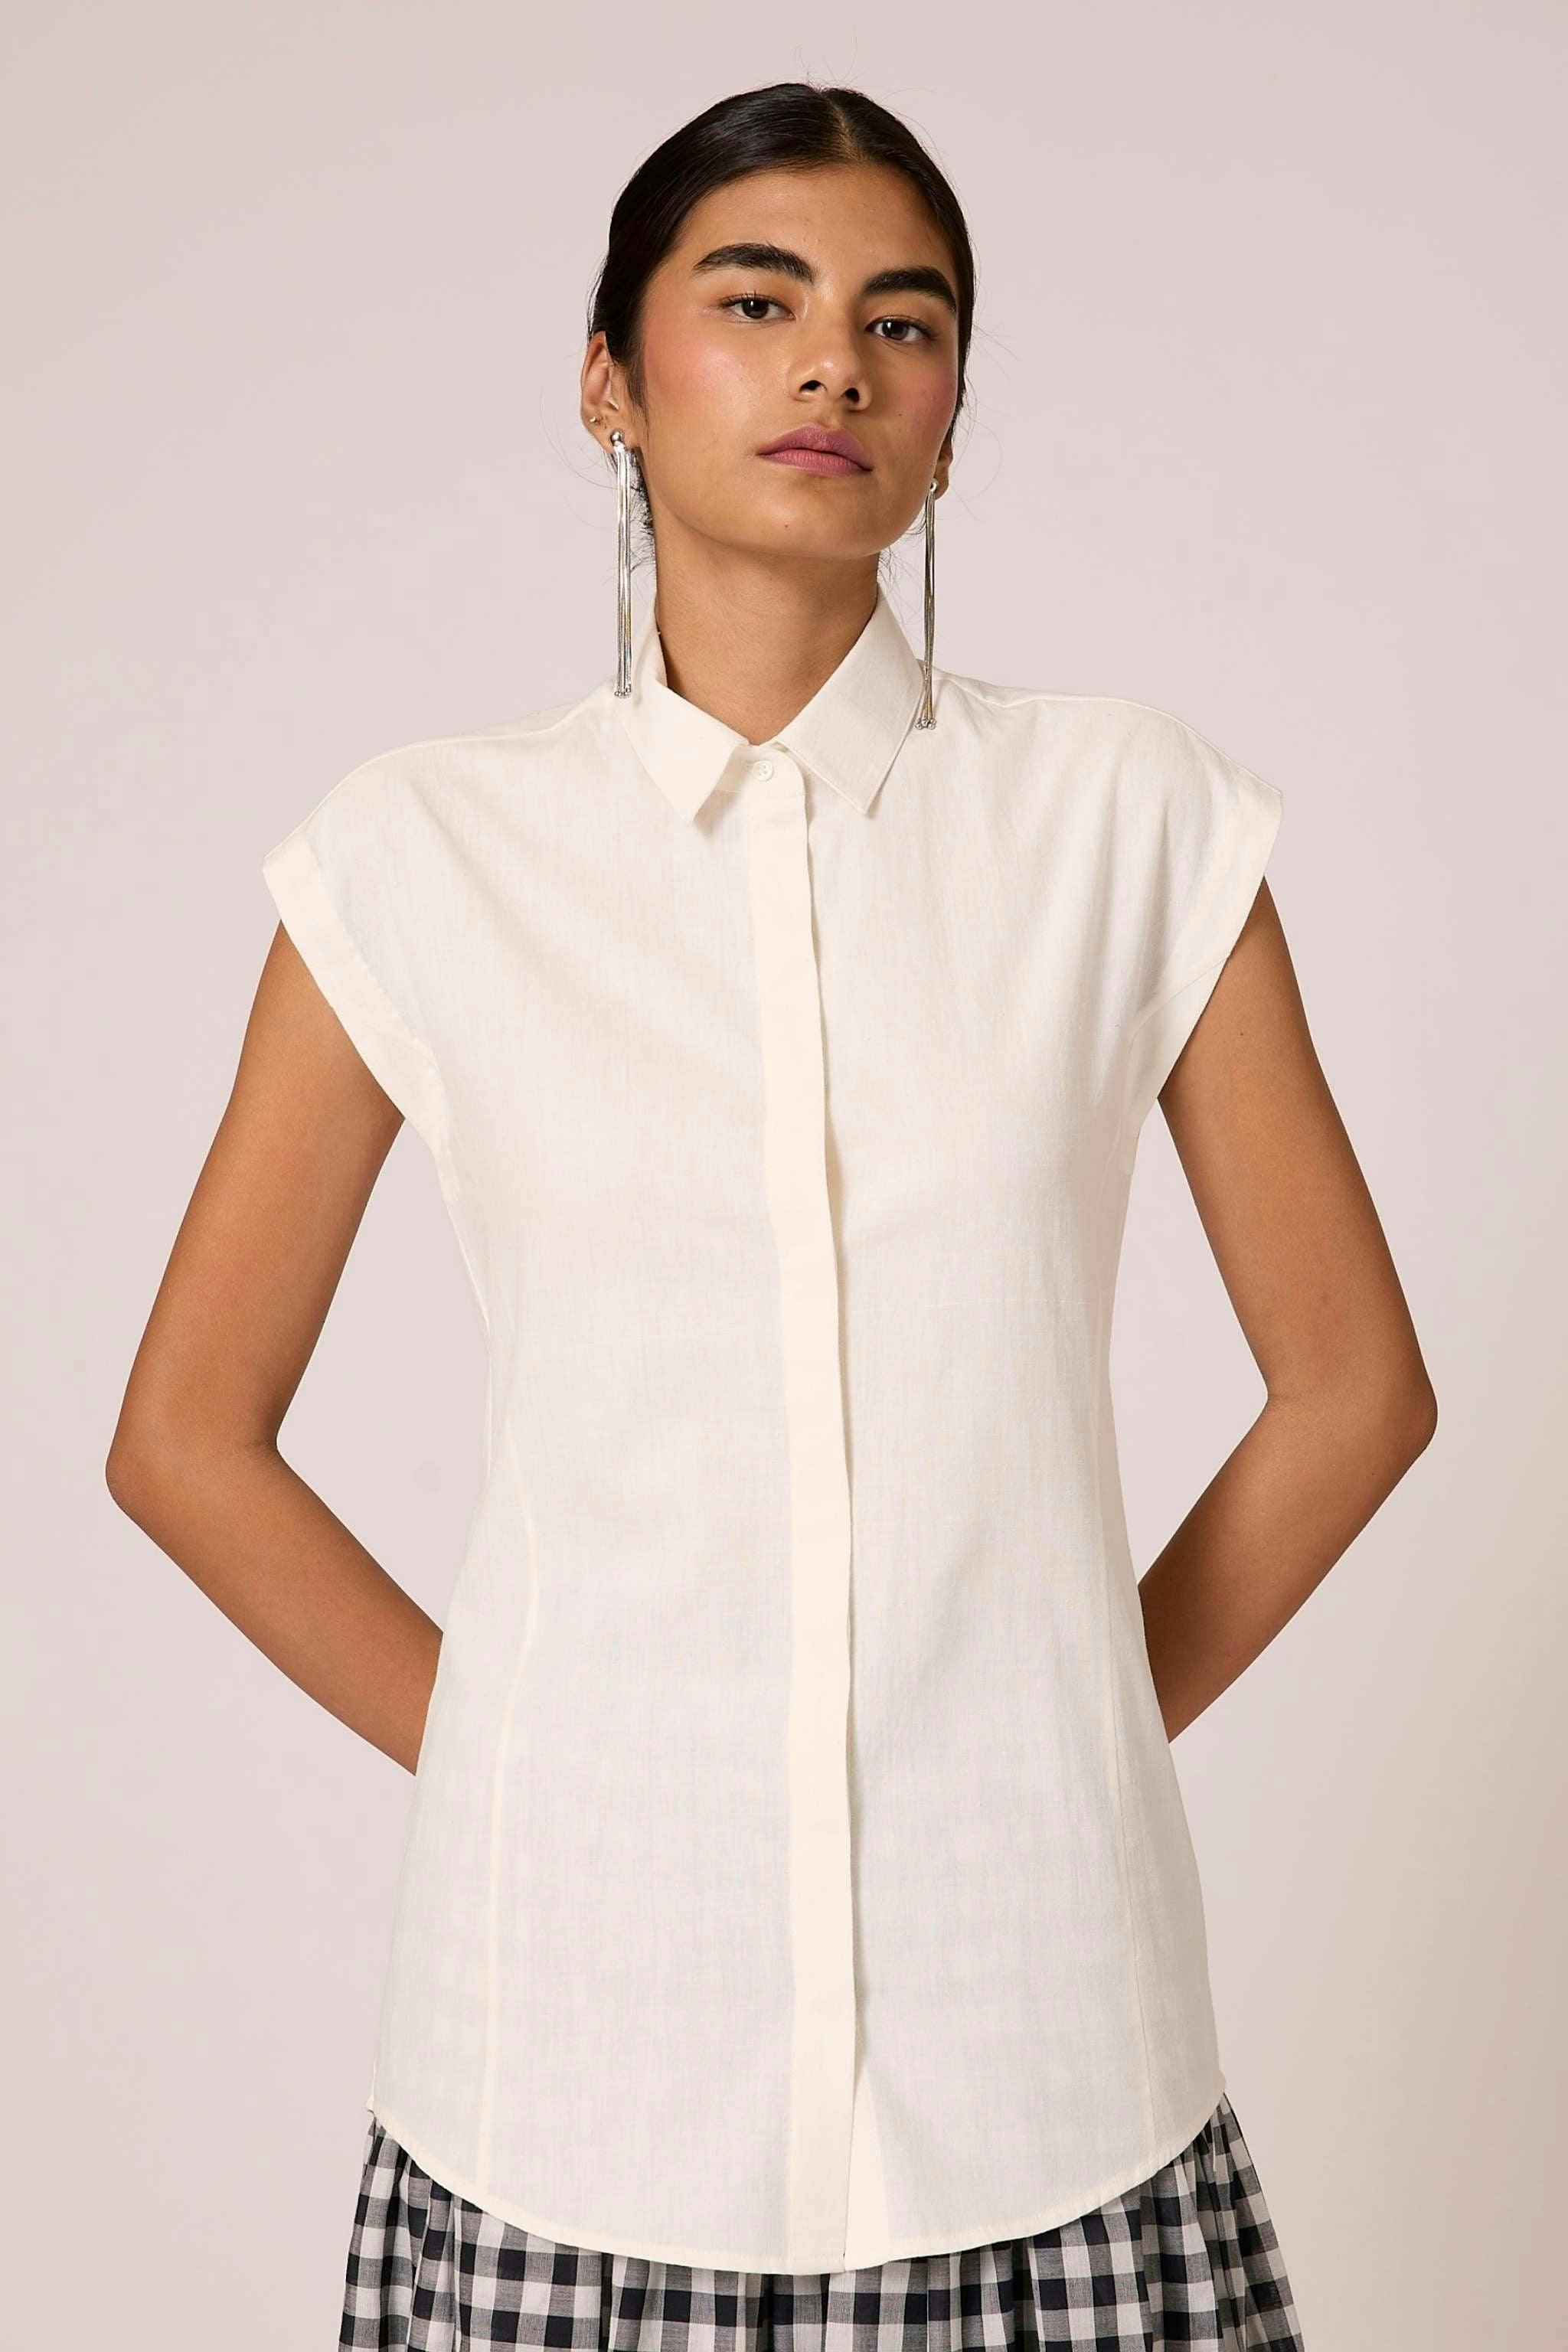 Cicaro Shirt - Blanc, a product by The Summer House